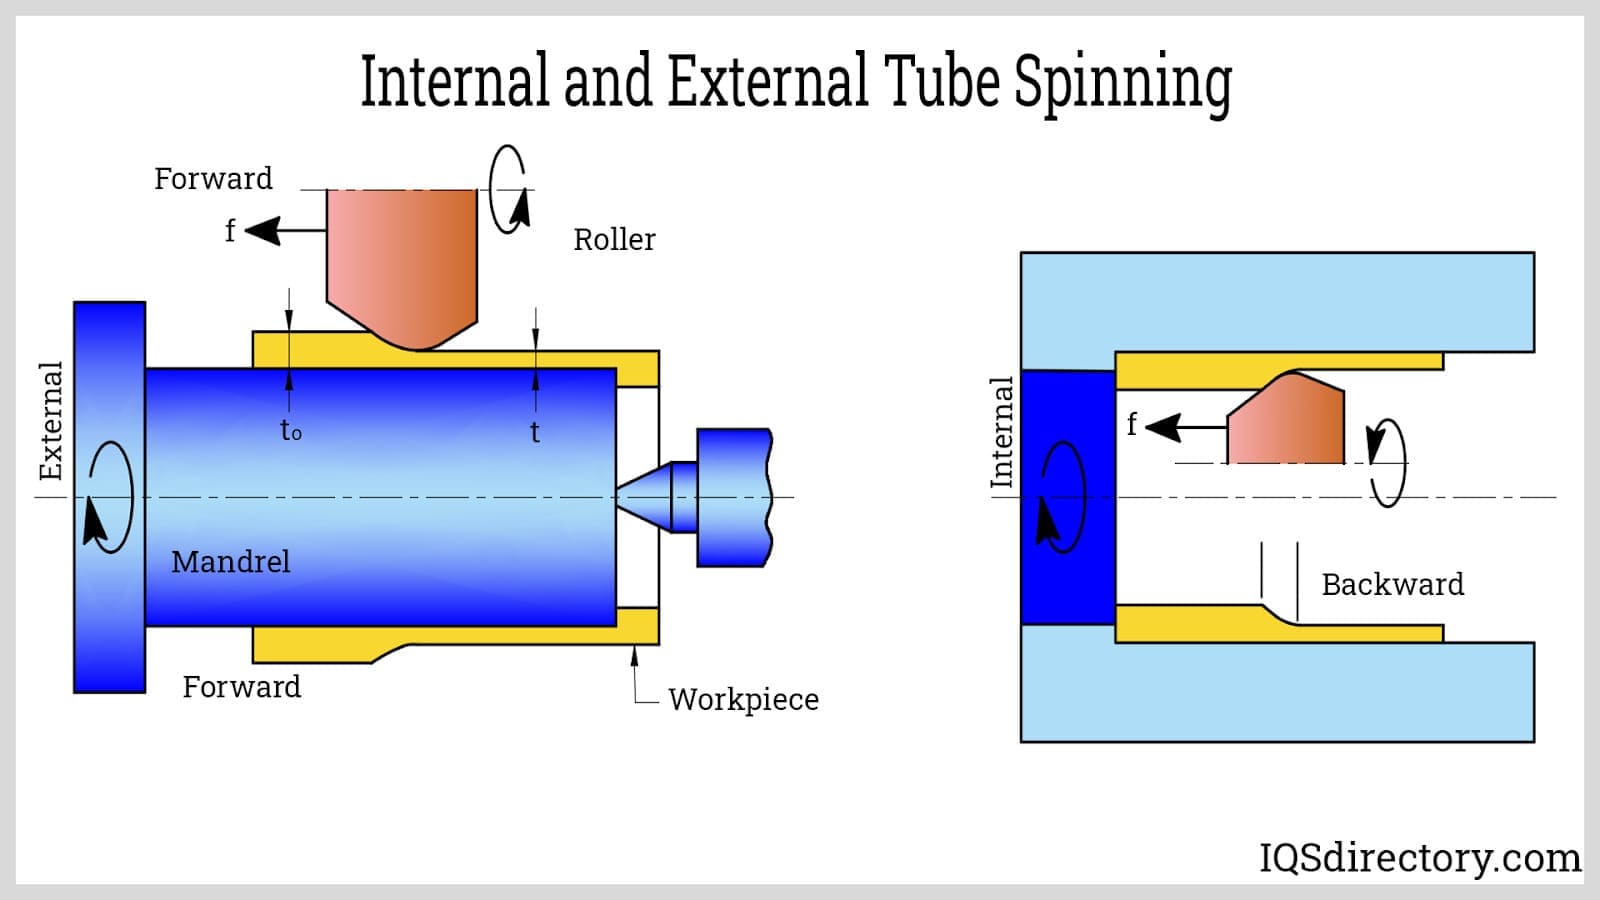 Internal and External Tube Spinning